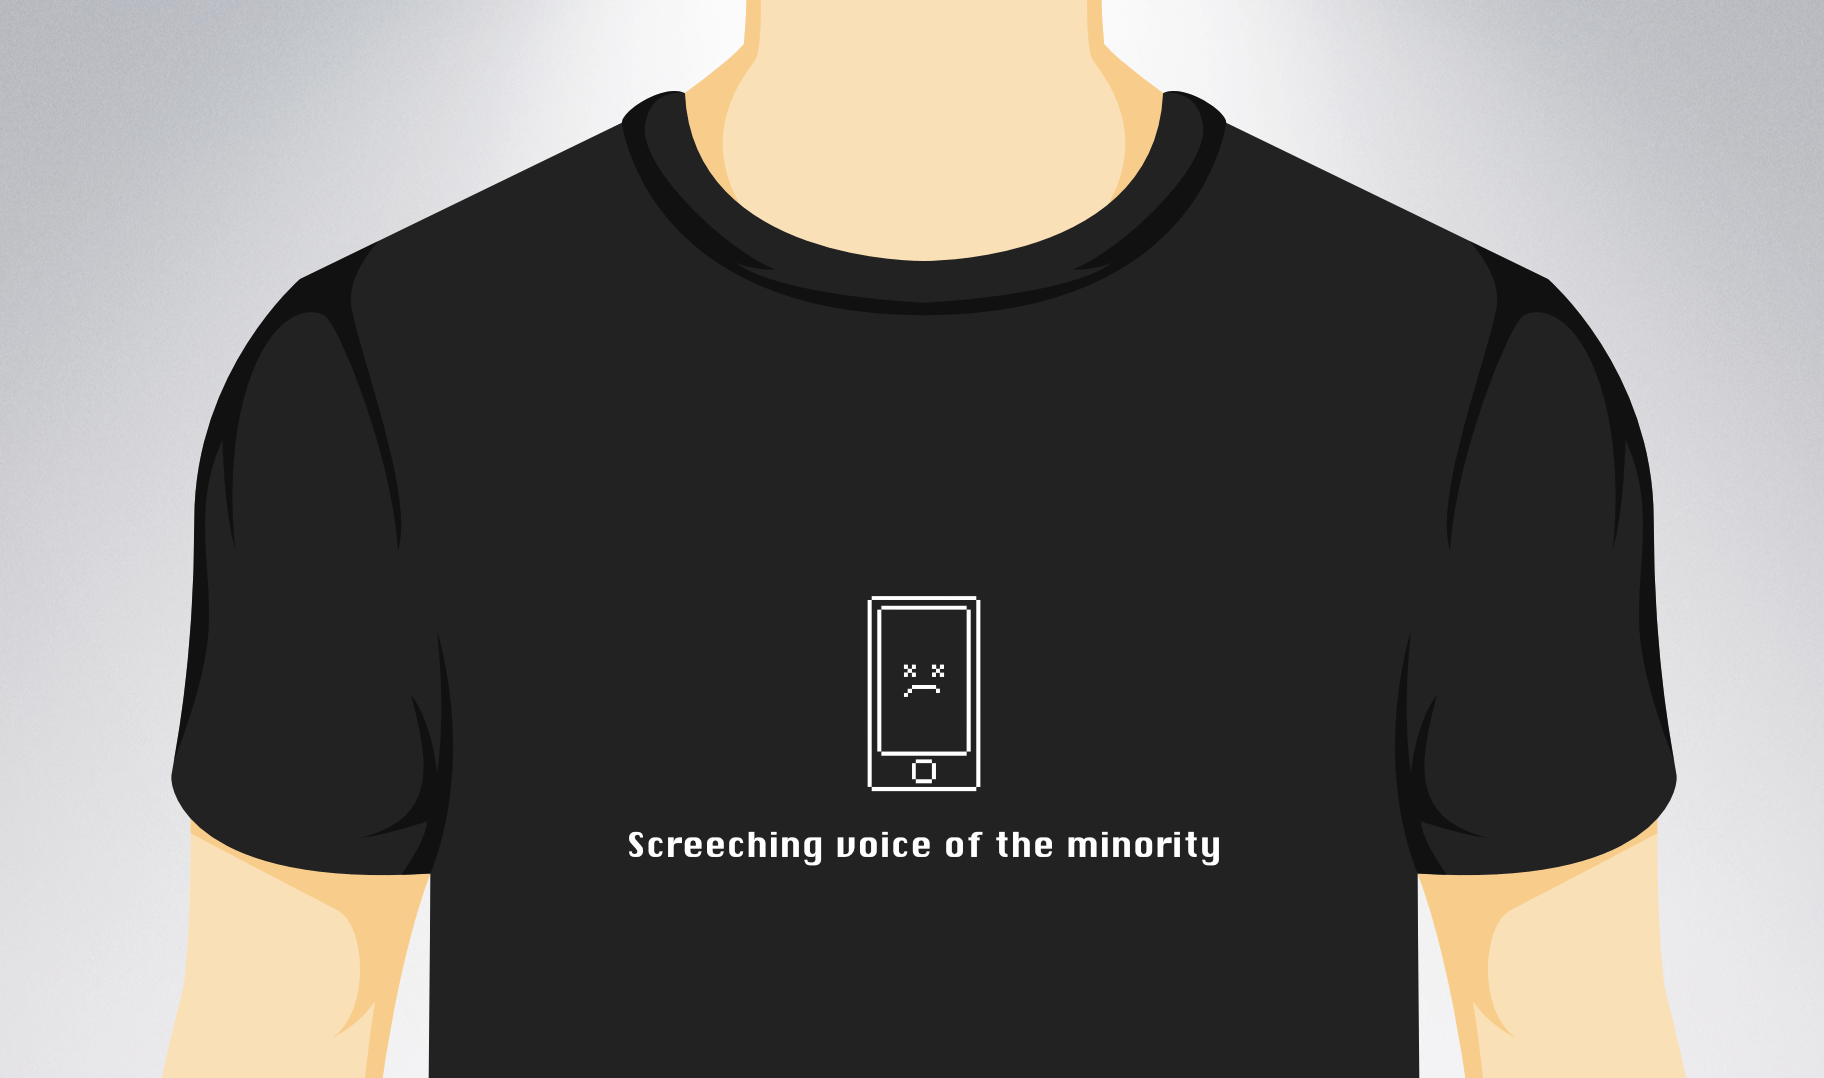 Illustration of white man wearing black t-shirt that has a frowning face iPhone and the words “the screeching voice of the minority.”